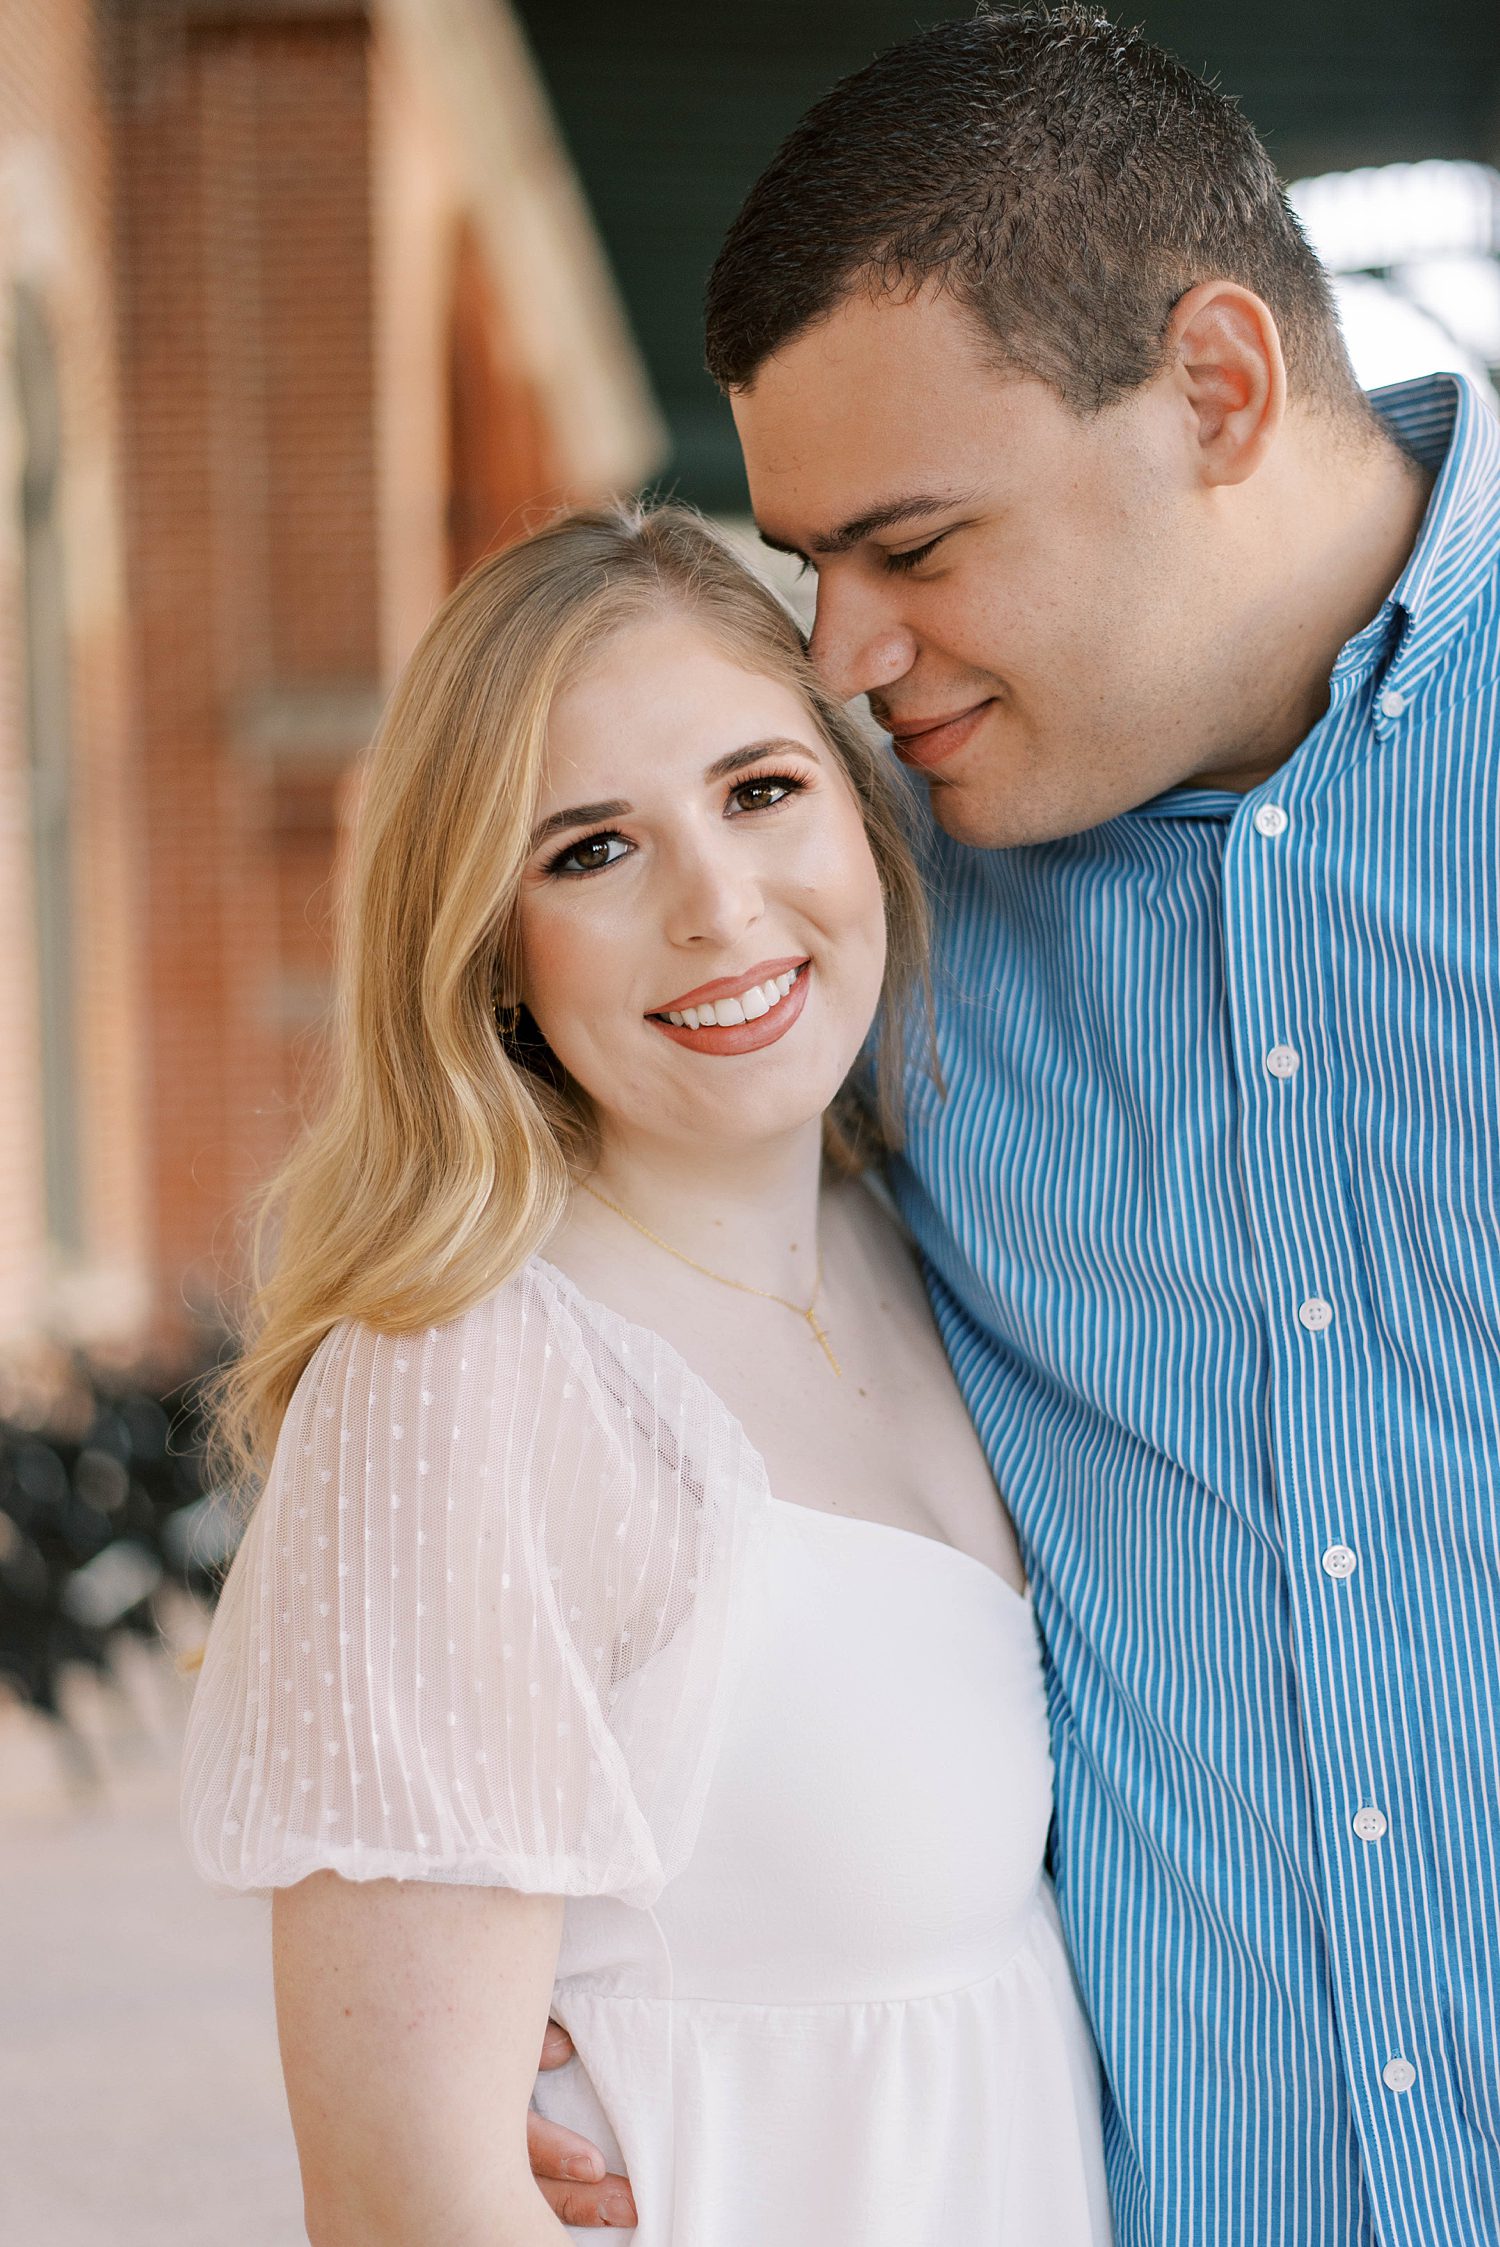 groom nuzzles bride's cheek at the University of Tampa in Florida during engagement photos